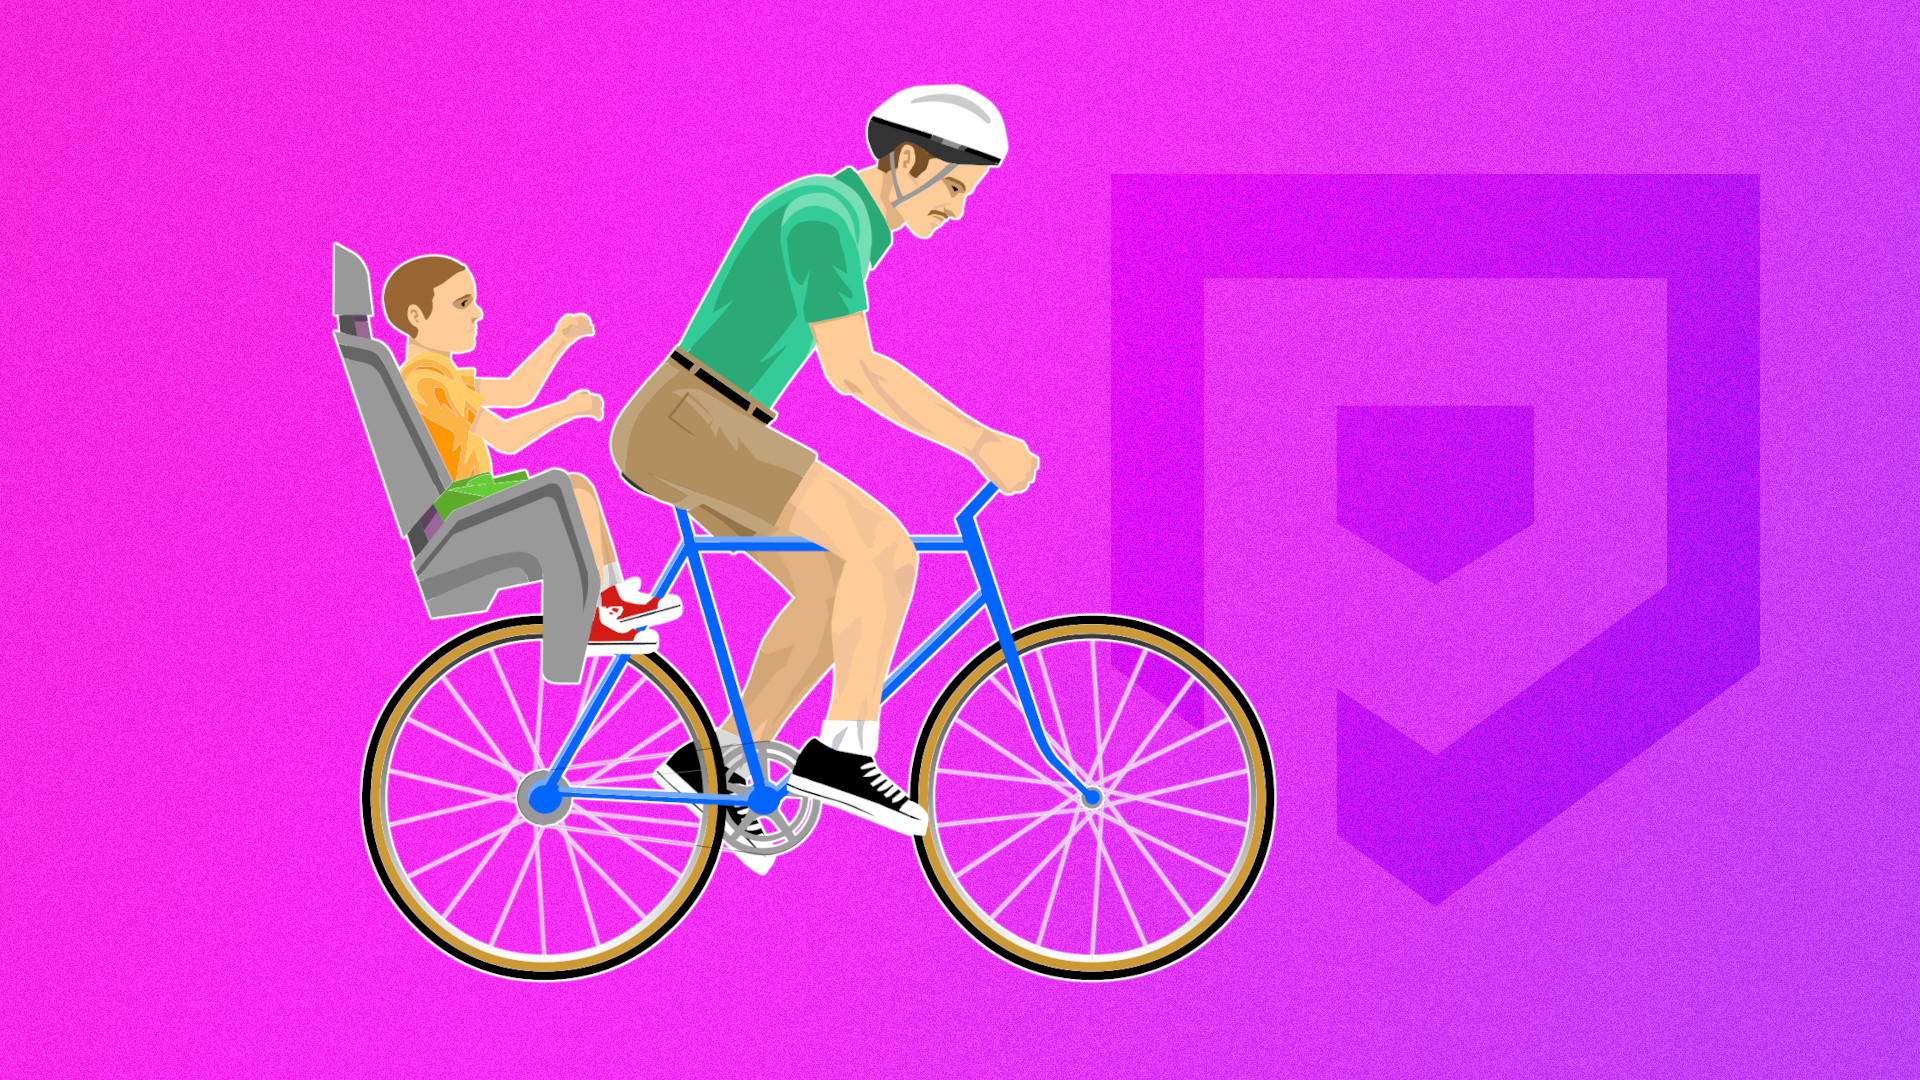 How to Play Happy Wheels on PC for Free